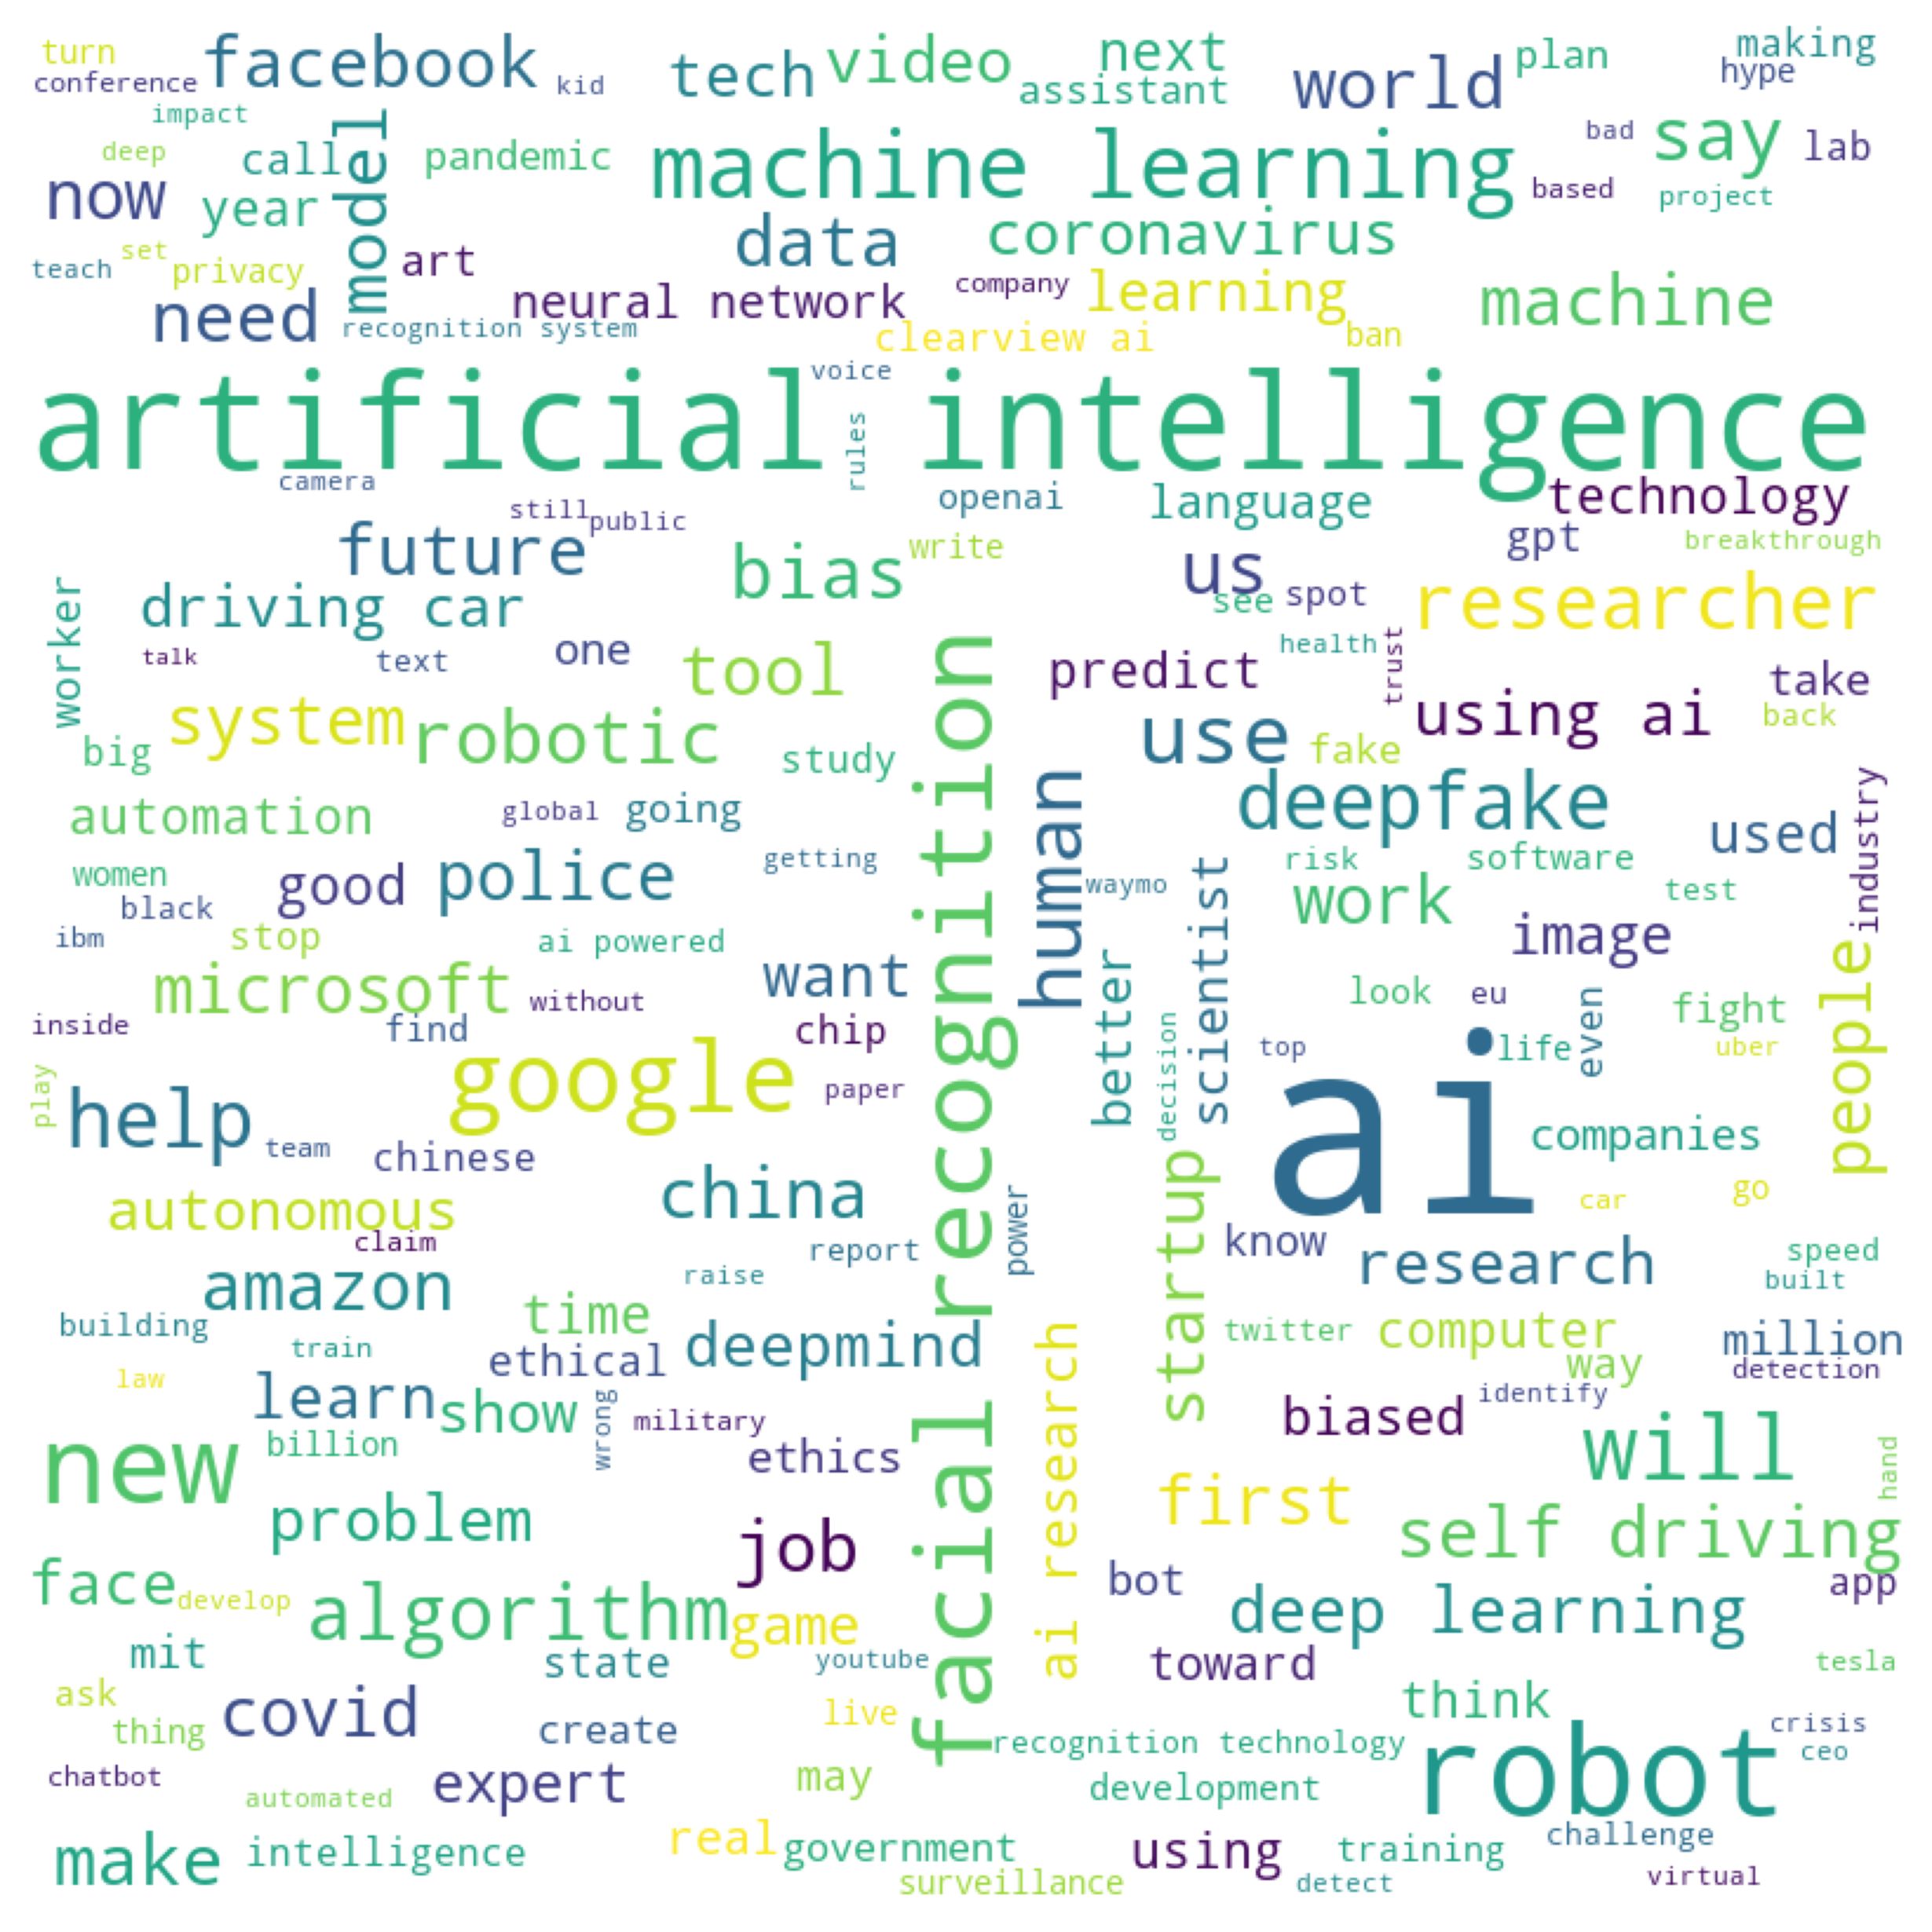 Analysis of 100 Weeks of Curated AI News